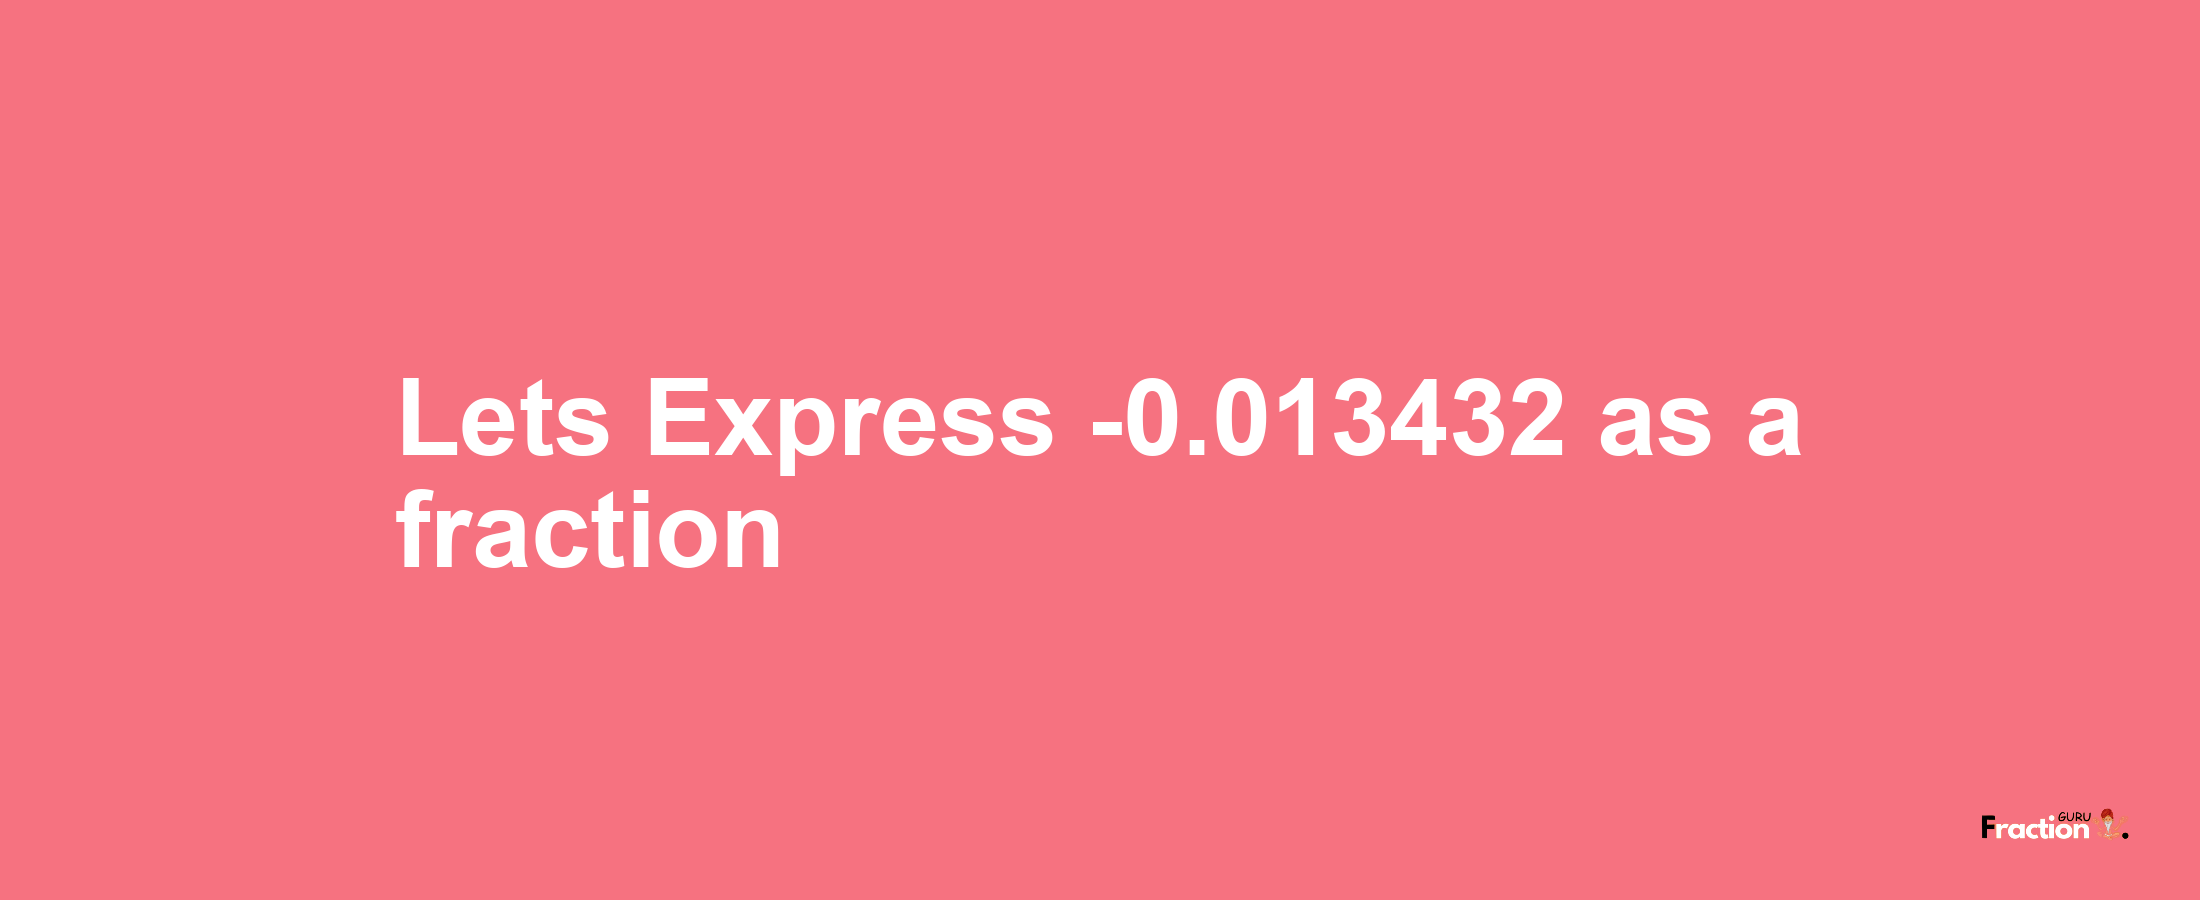 Lets Express -0.013432 as afraction